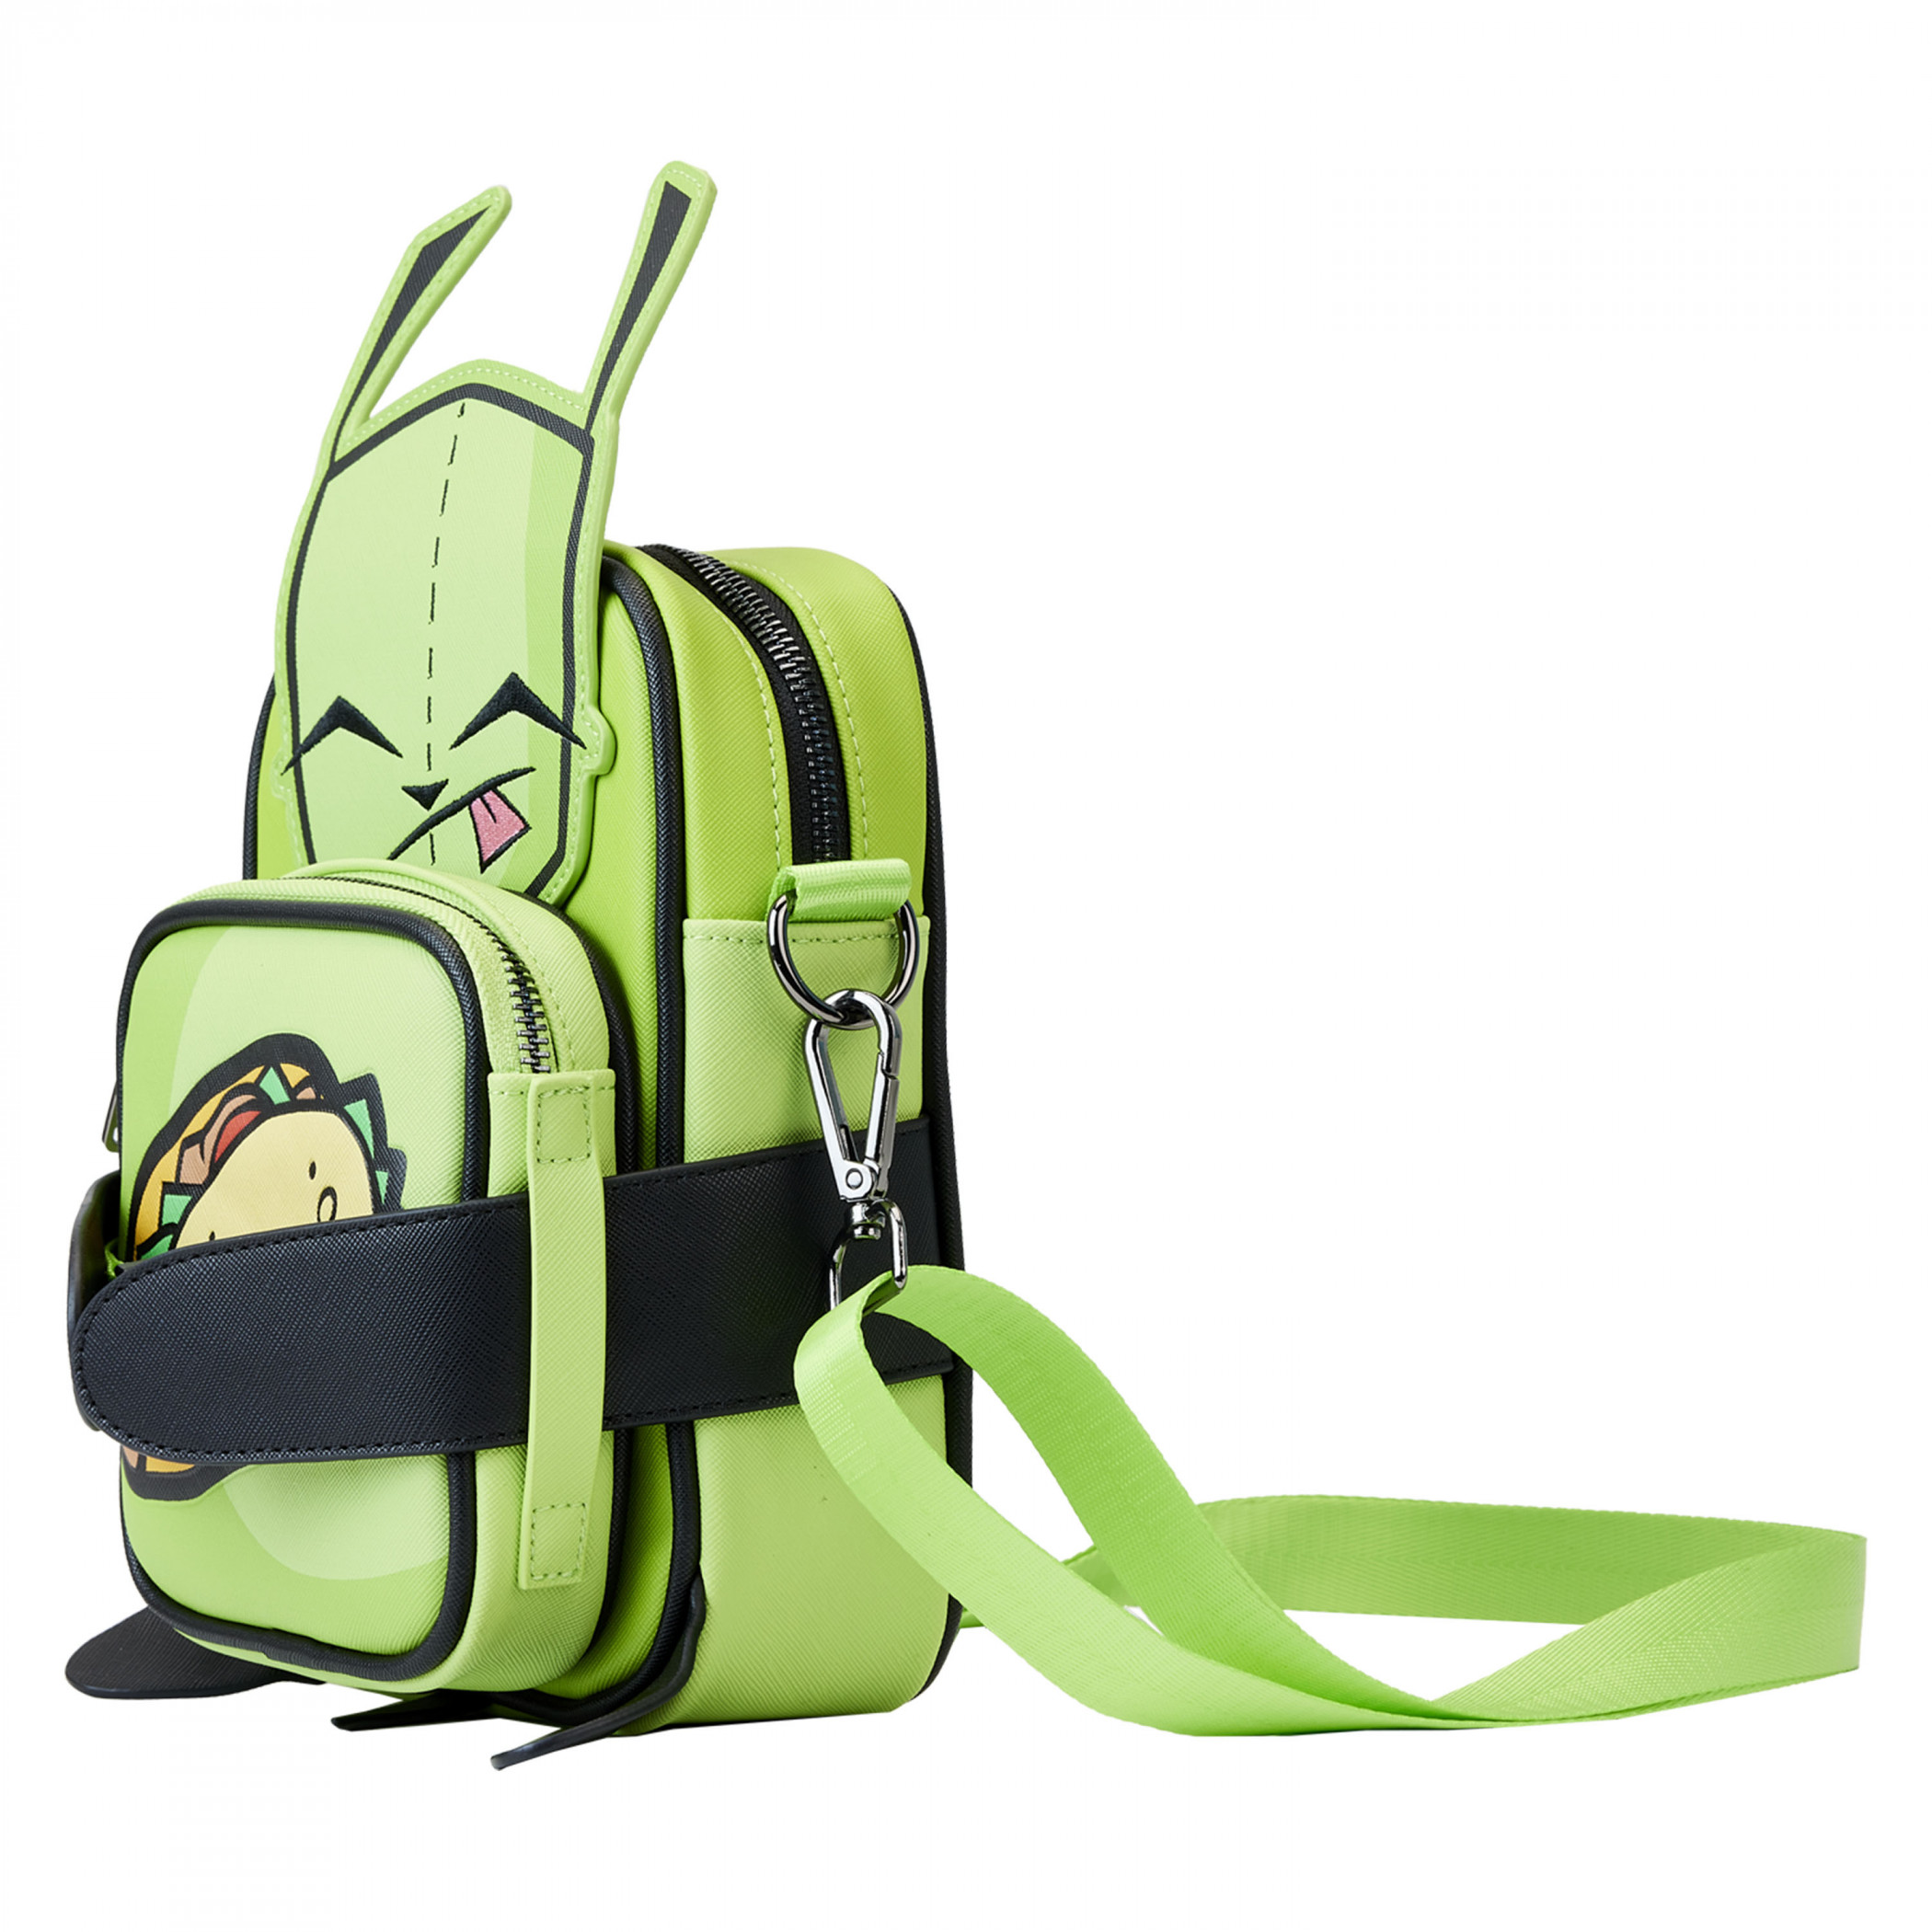 Invader Zim Gir and Tacos Crossbody Bag by Loungefly